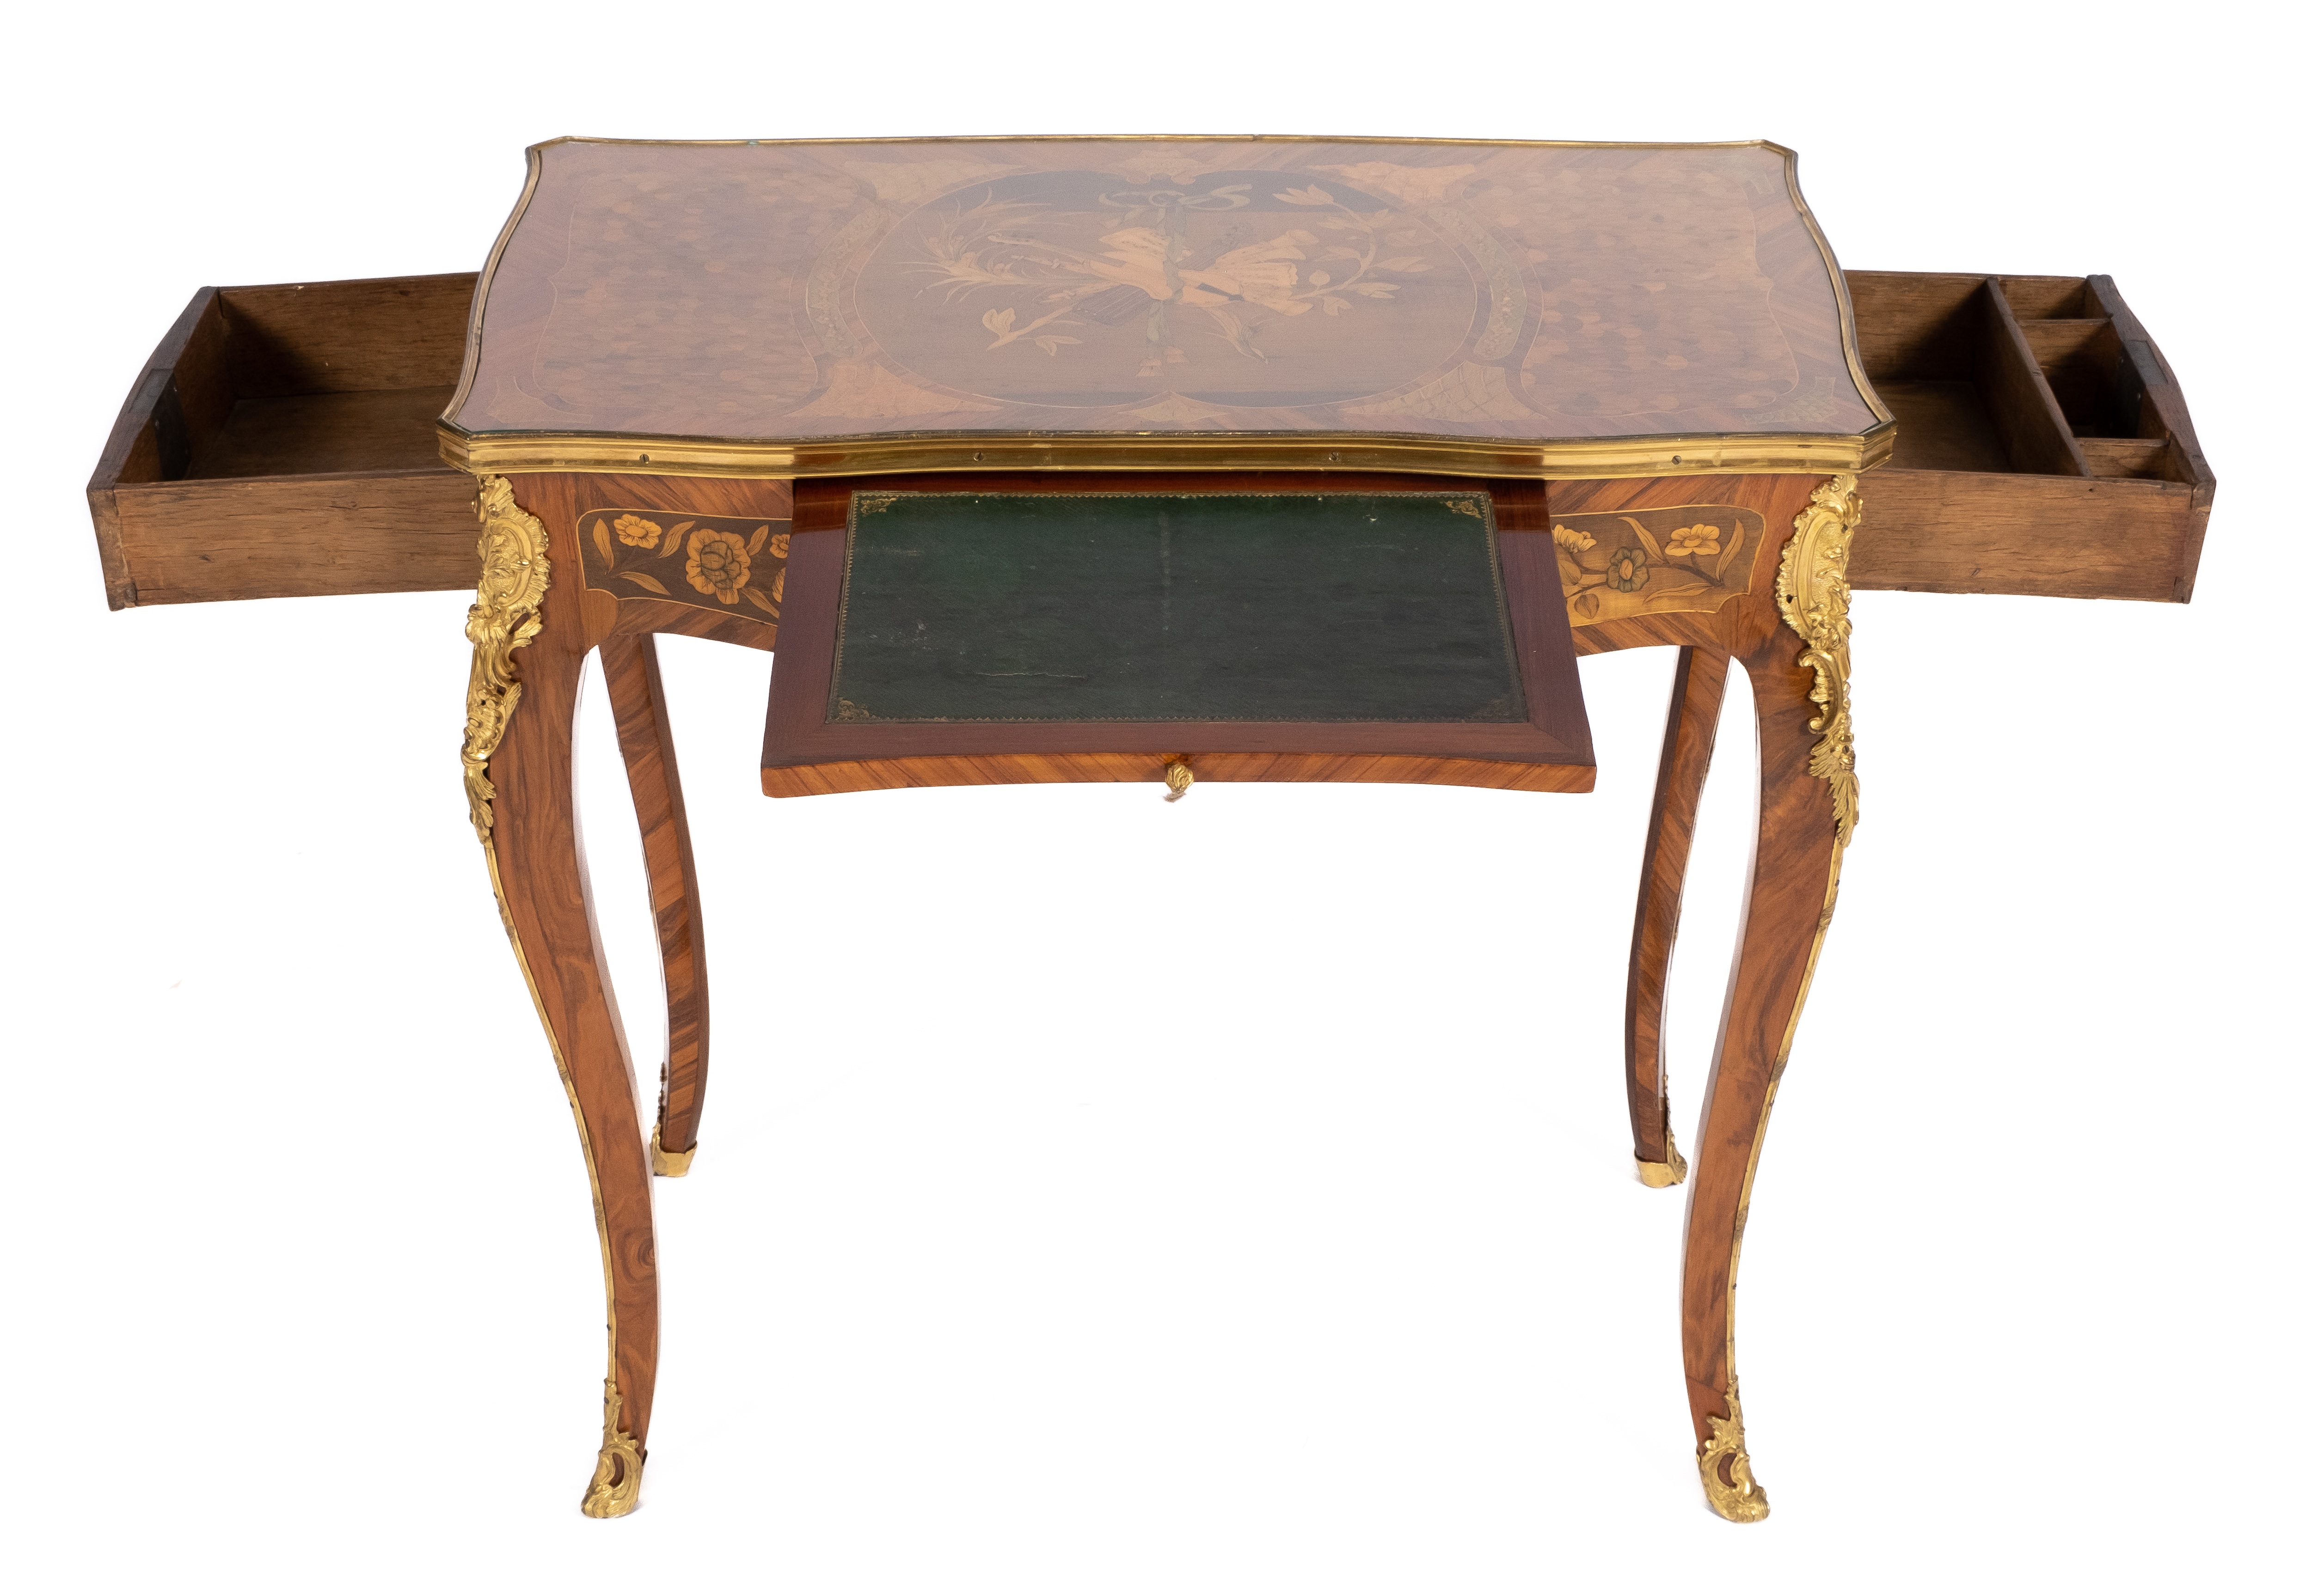 A Louis XV ormolu-mounted kingwood, sycamore and fruitwood marquetry table de salon - Image 3 of 4